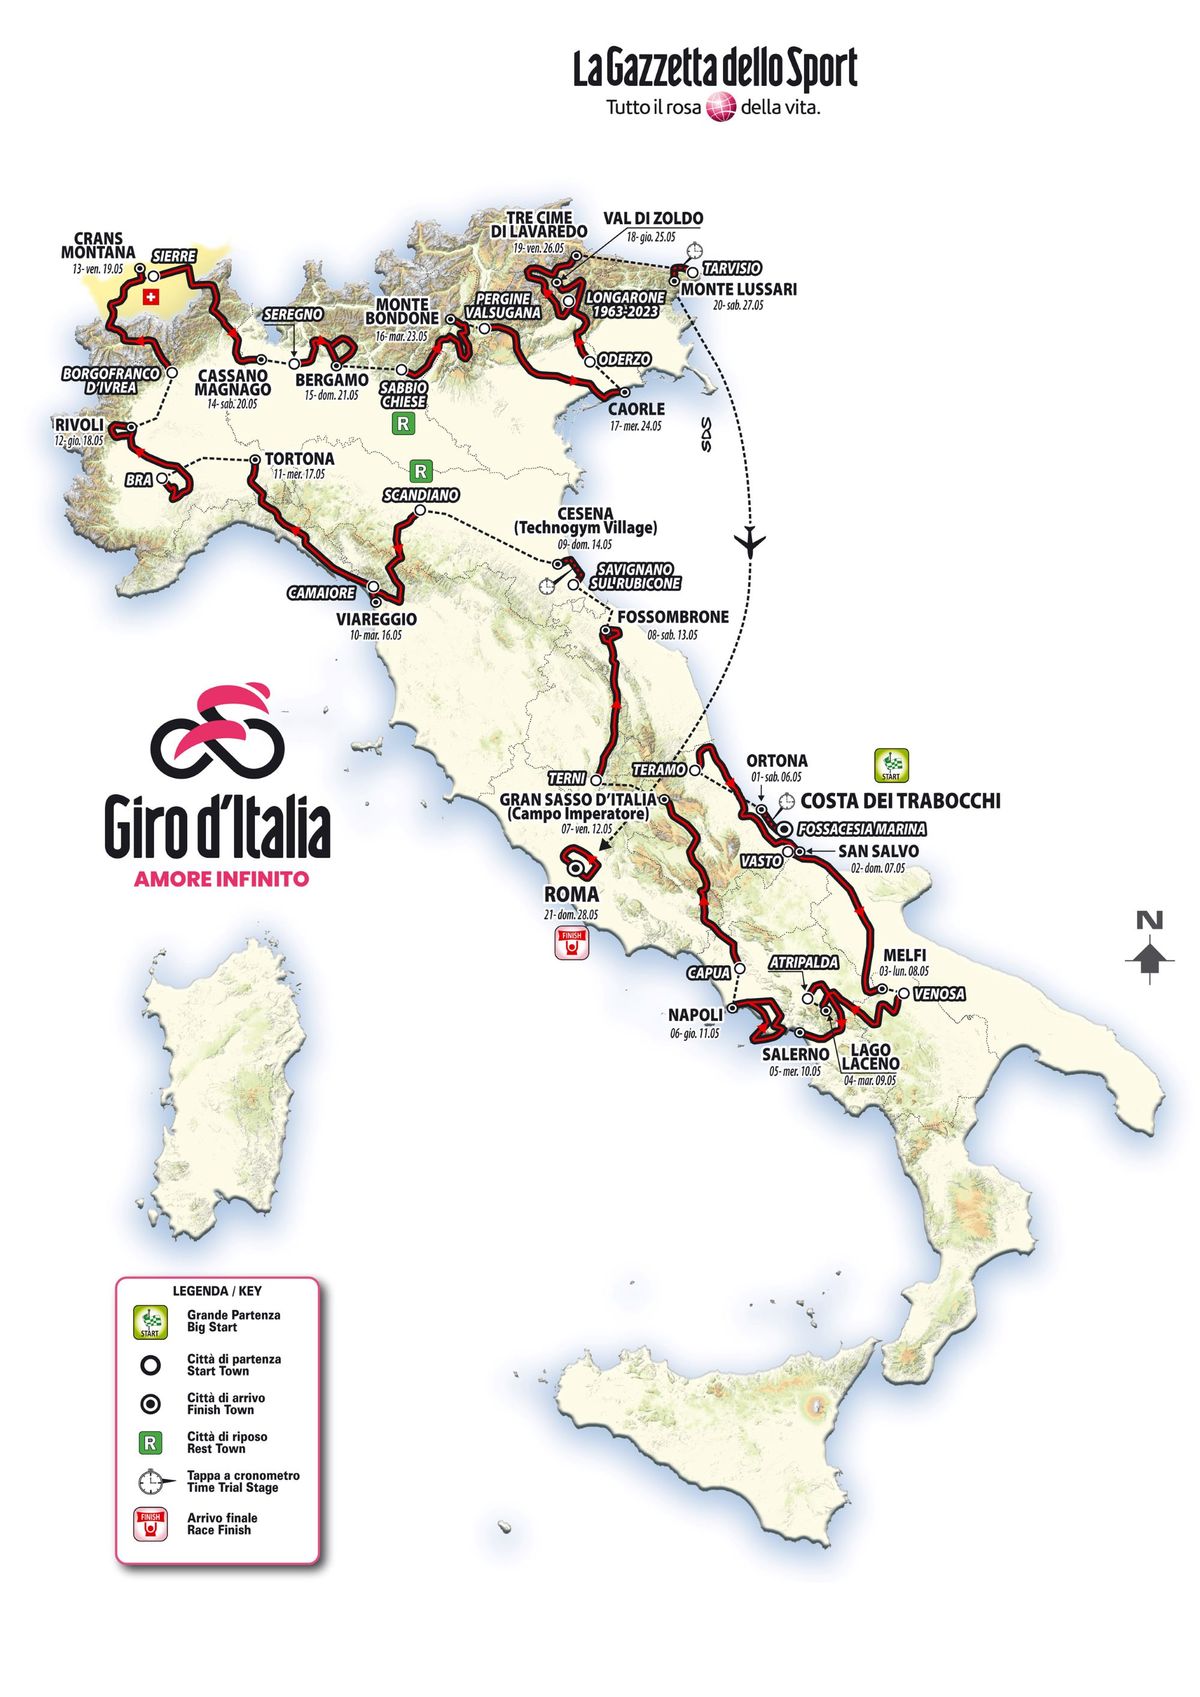 Giro d’Italia 2023 route features 70.6km of time trialling and tough final week